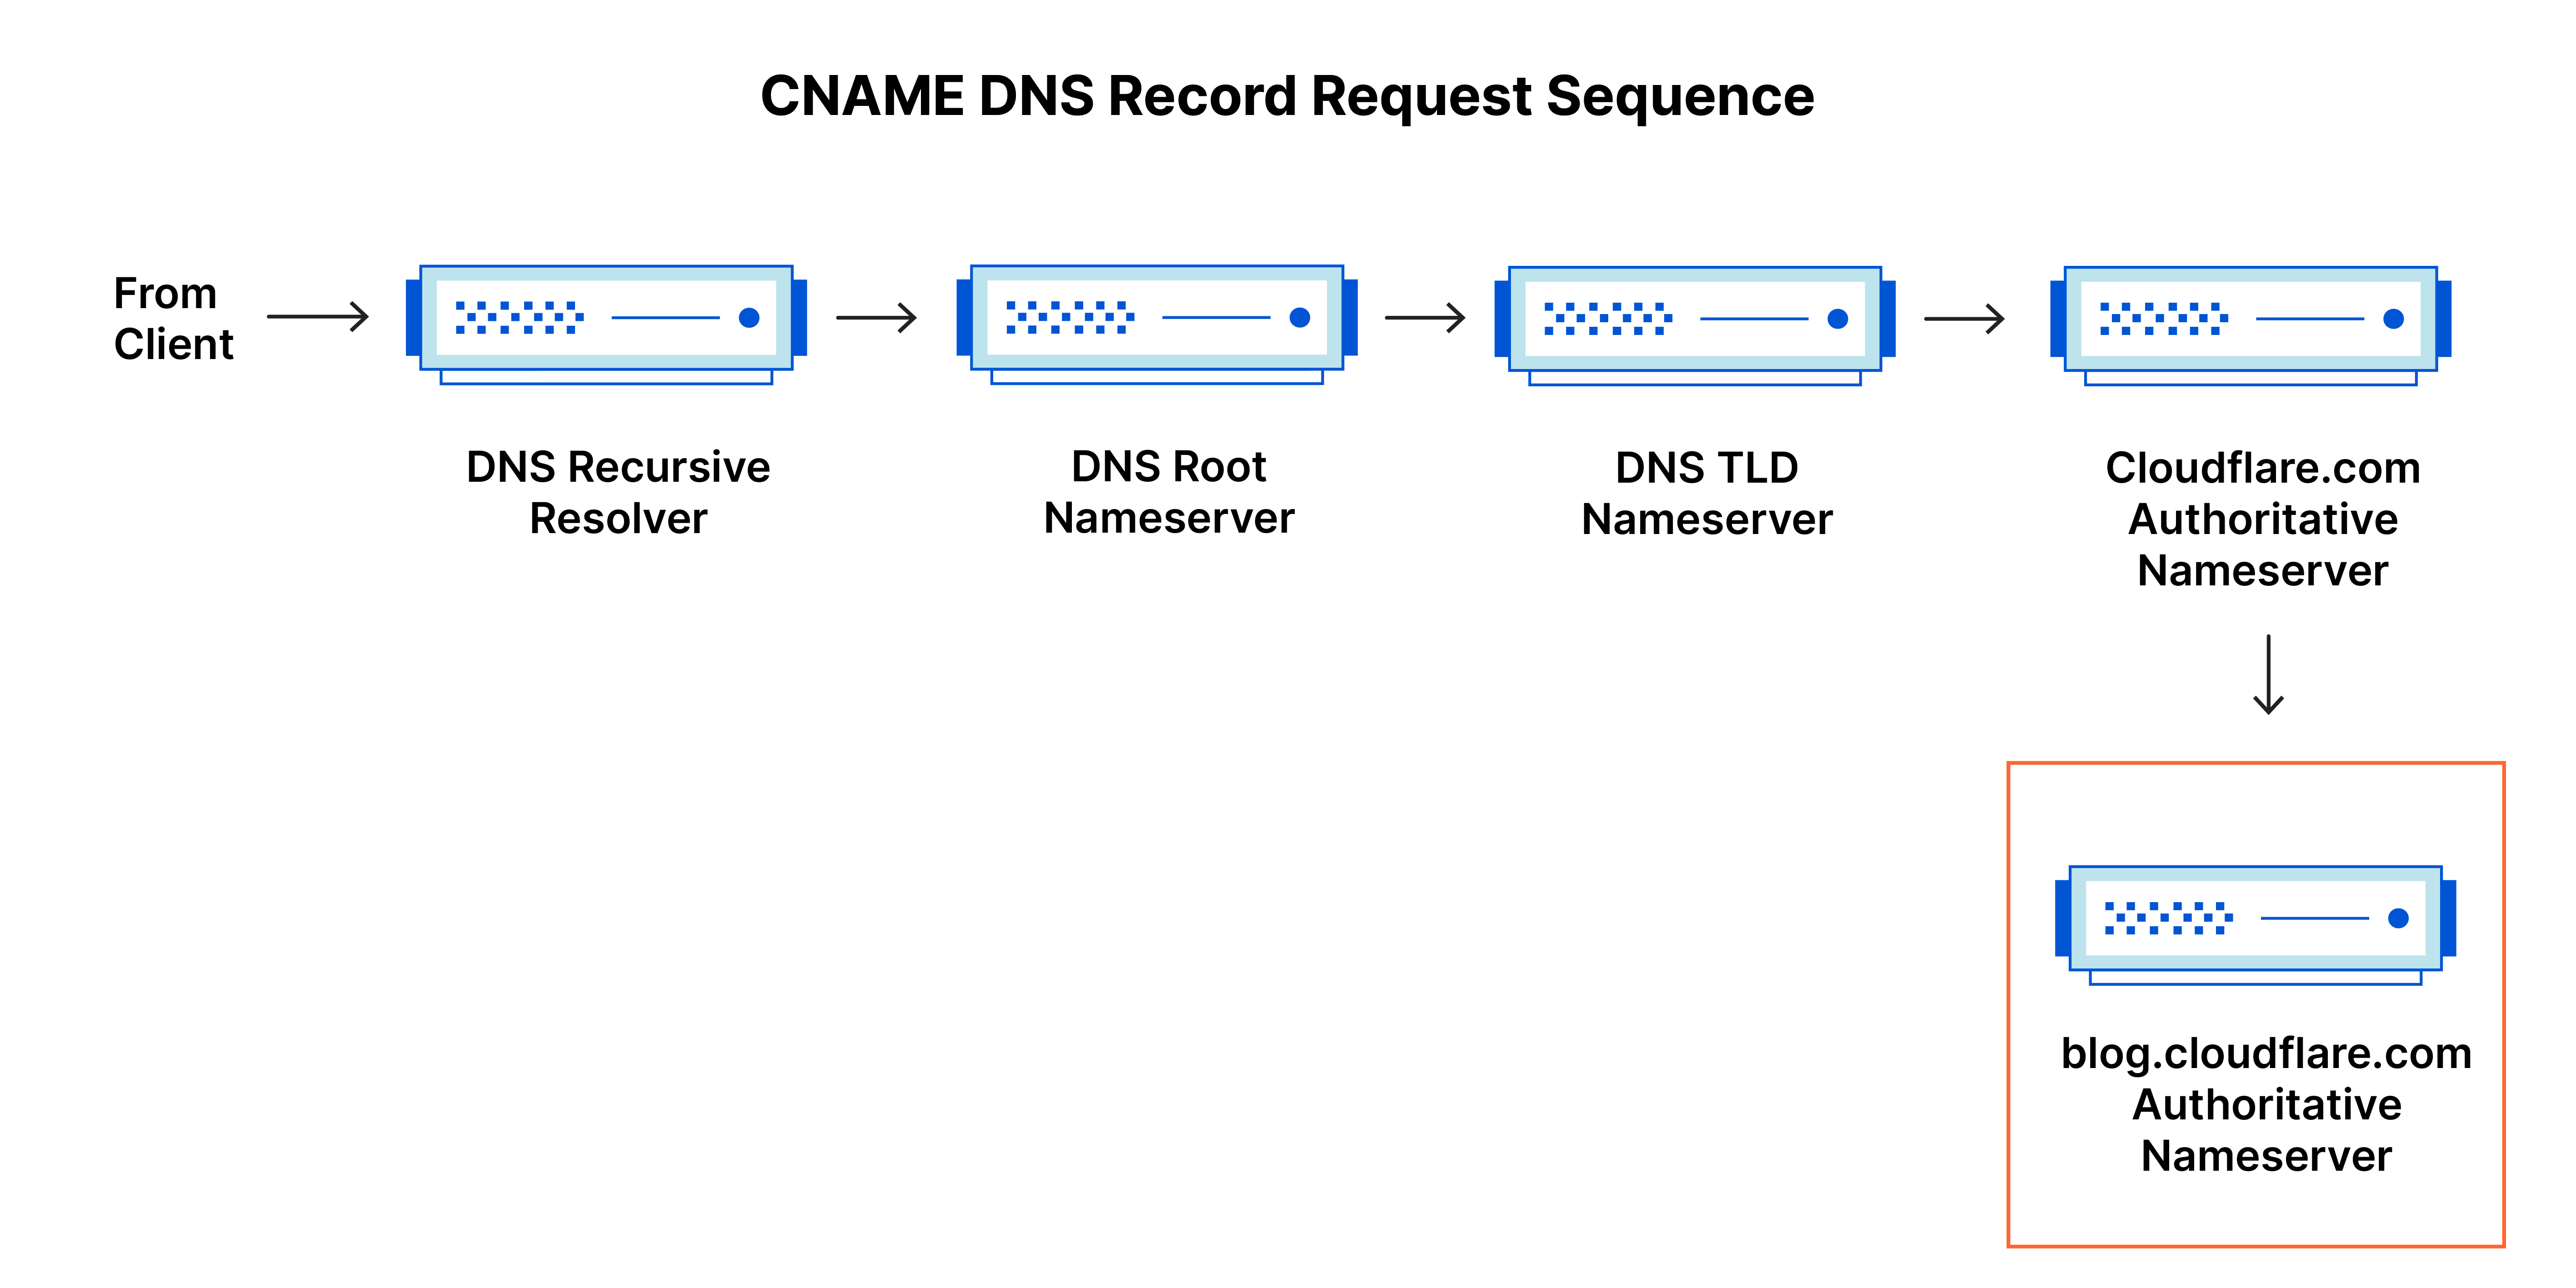 How to implement DNS protocols for faster internet and traffic management